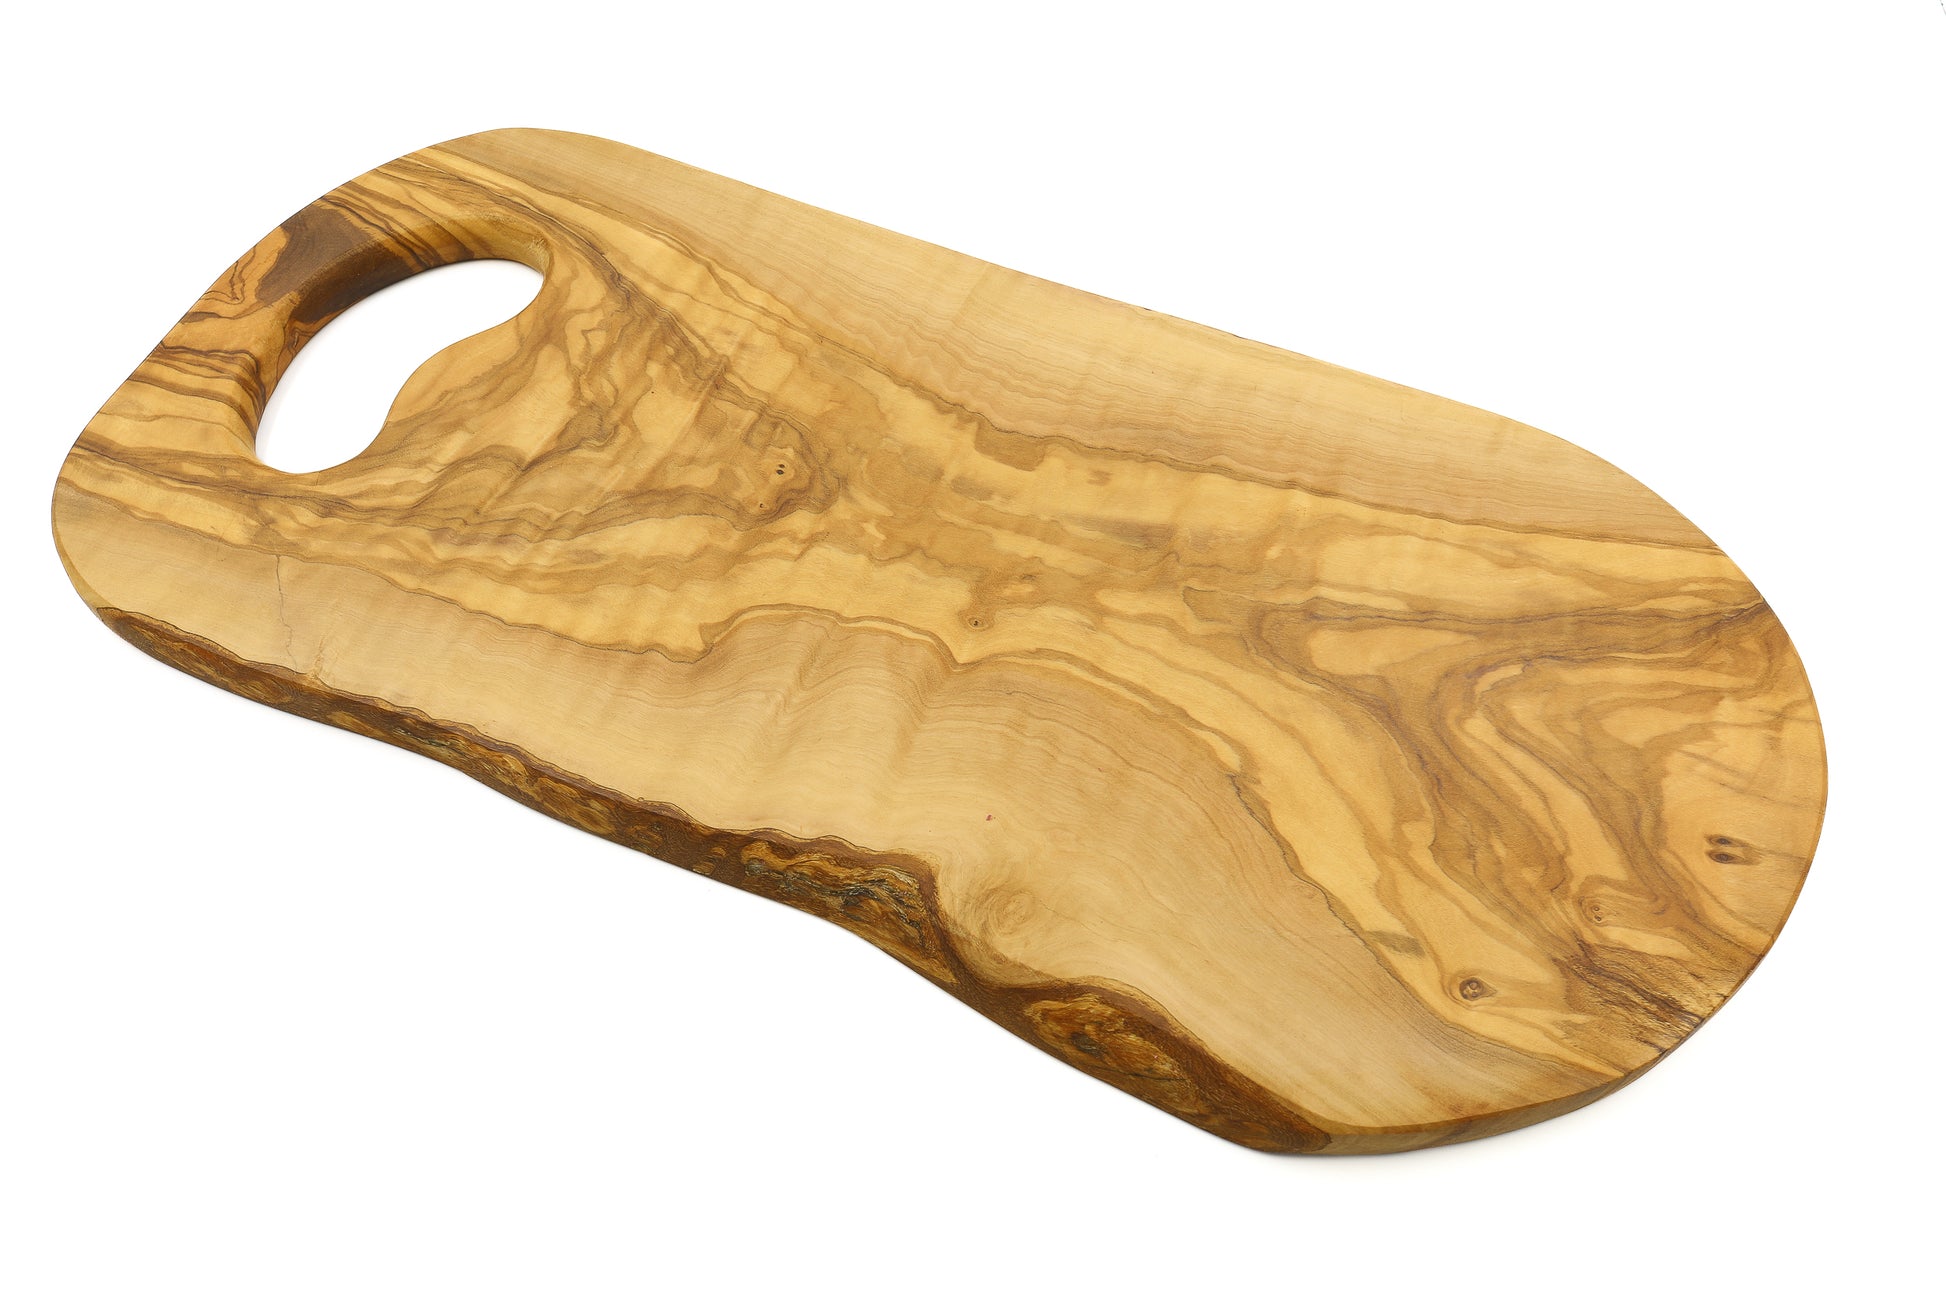 Rustic olive wood cutting board with an organic, hand-friendly shape